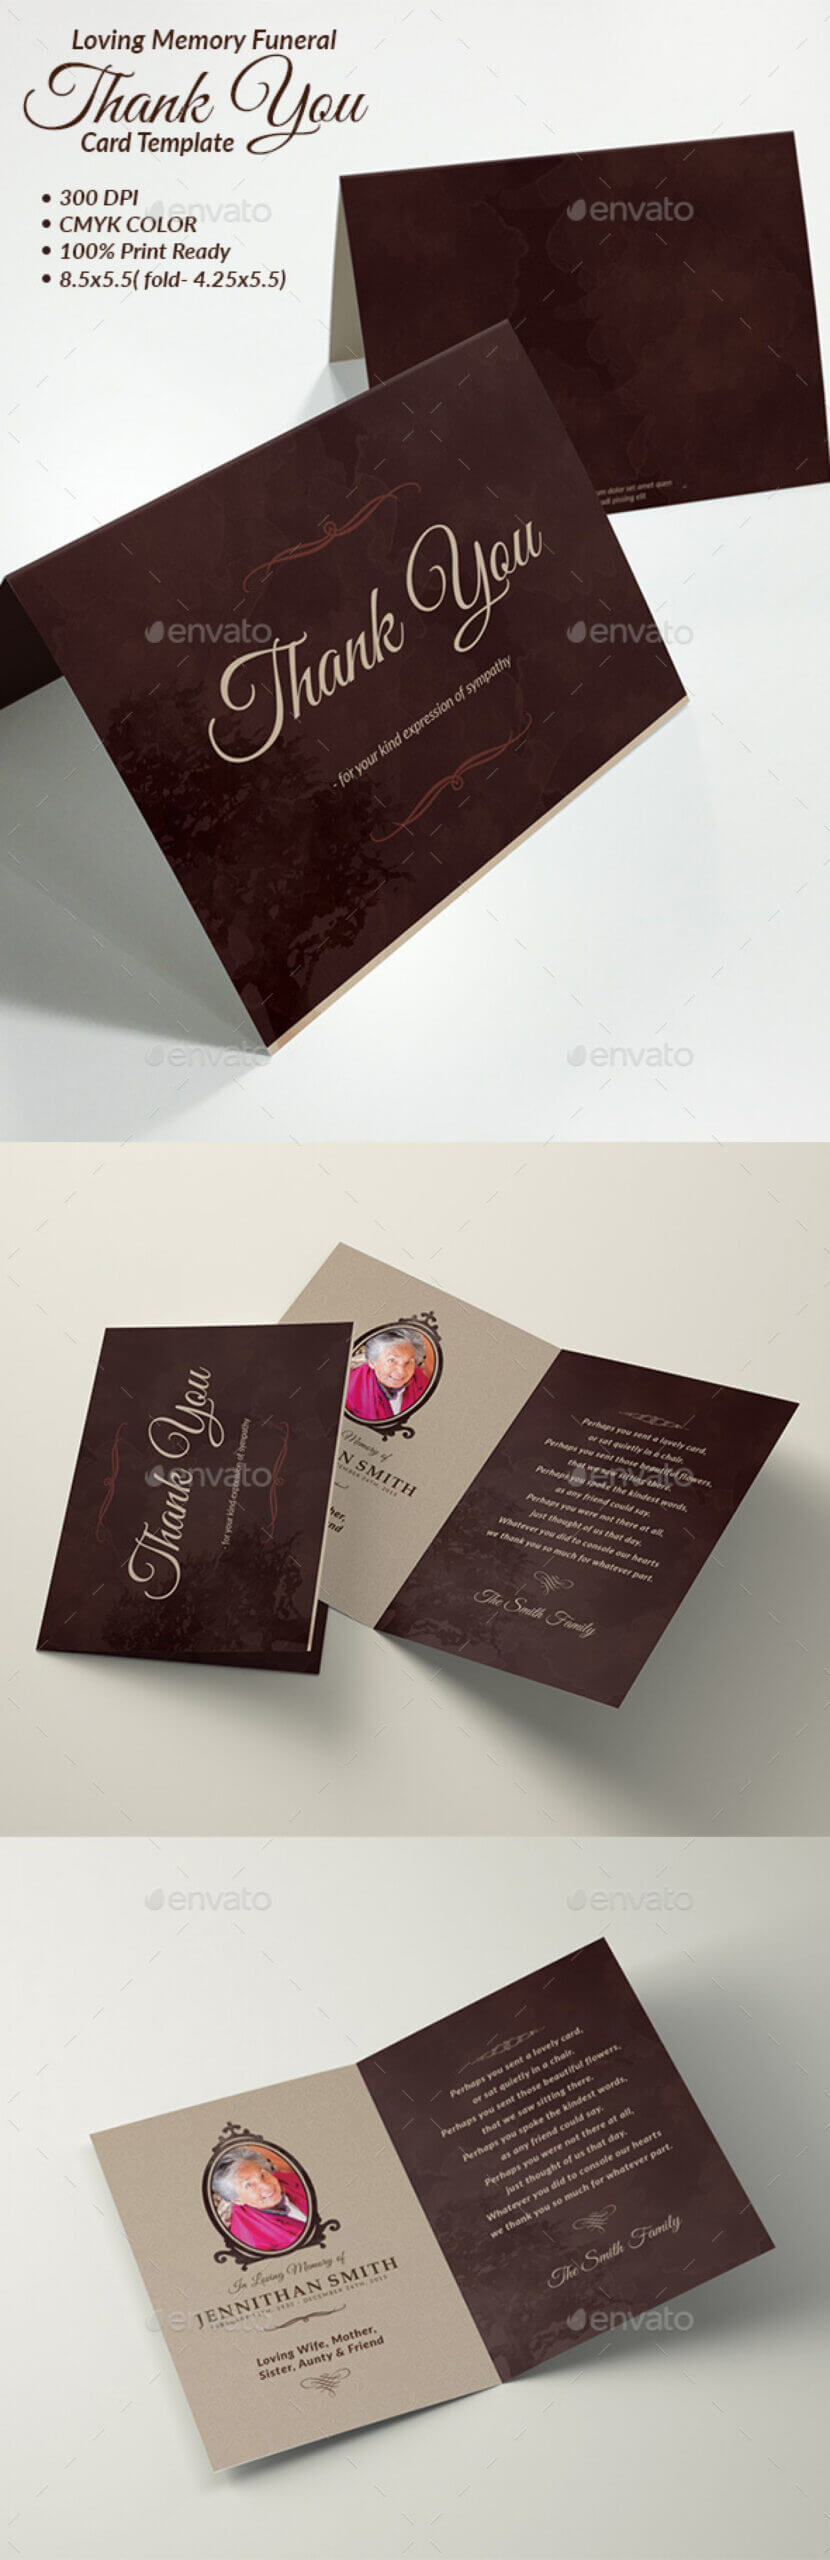 007 Template Ideas In Loving Memory Templates Fantastic Free Within Powerpoint Thank You Card Template